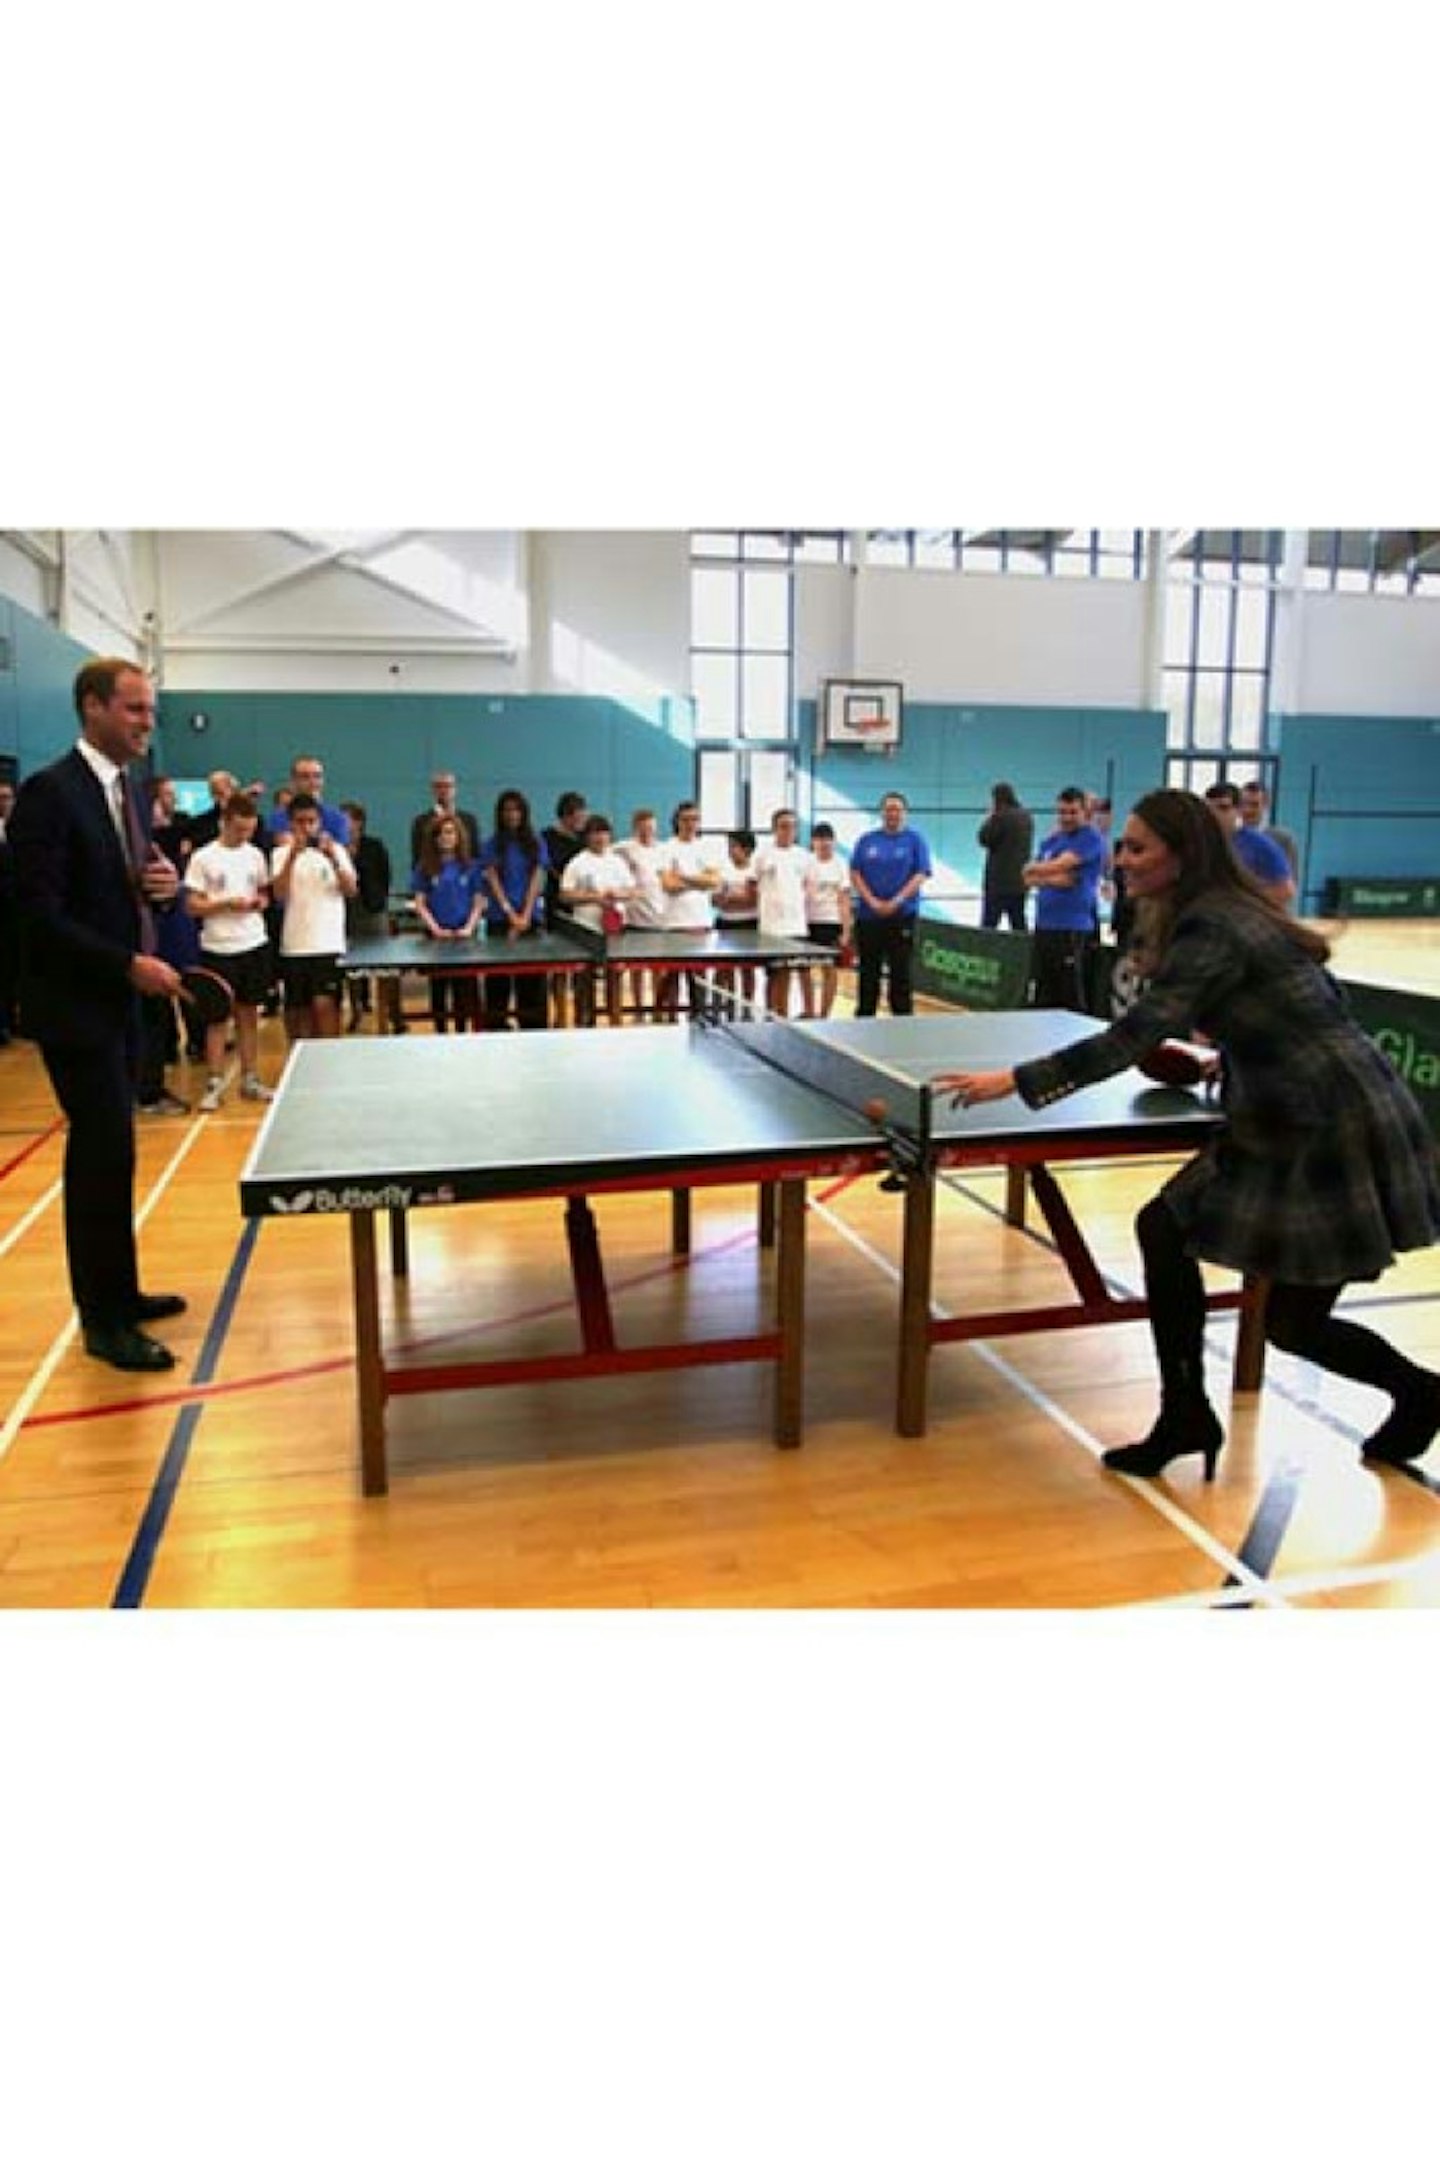 40-39. Time for table tennis in April 2013